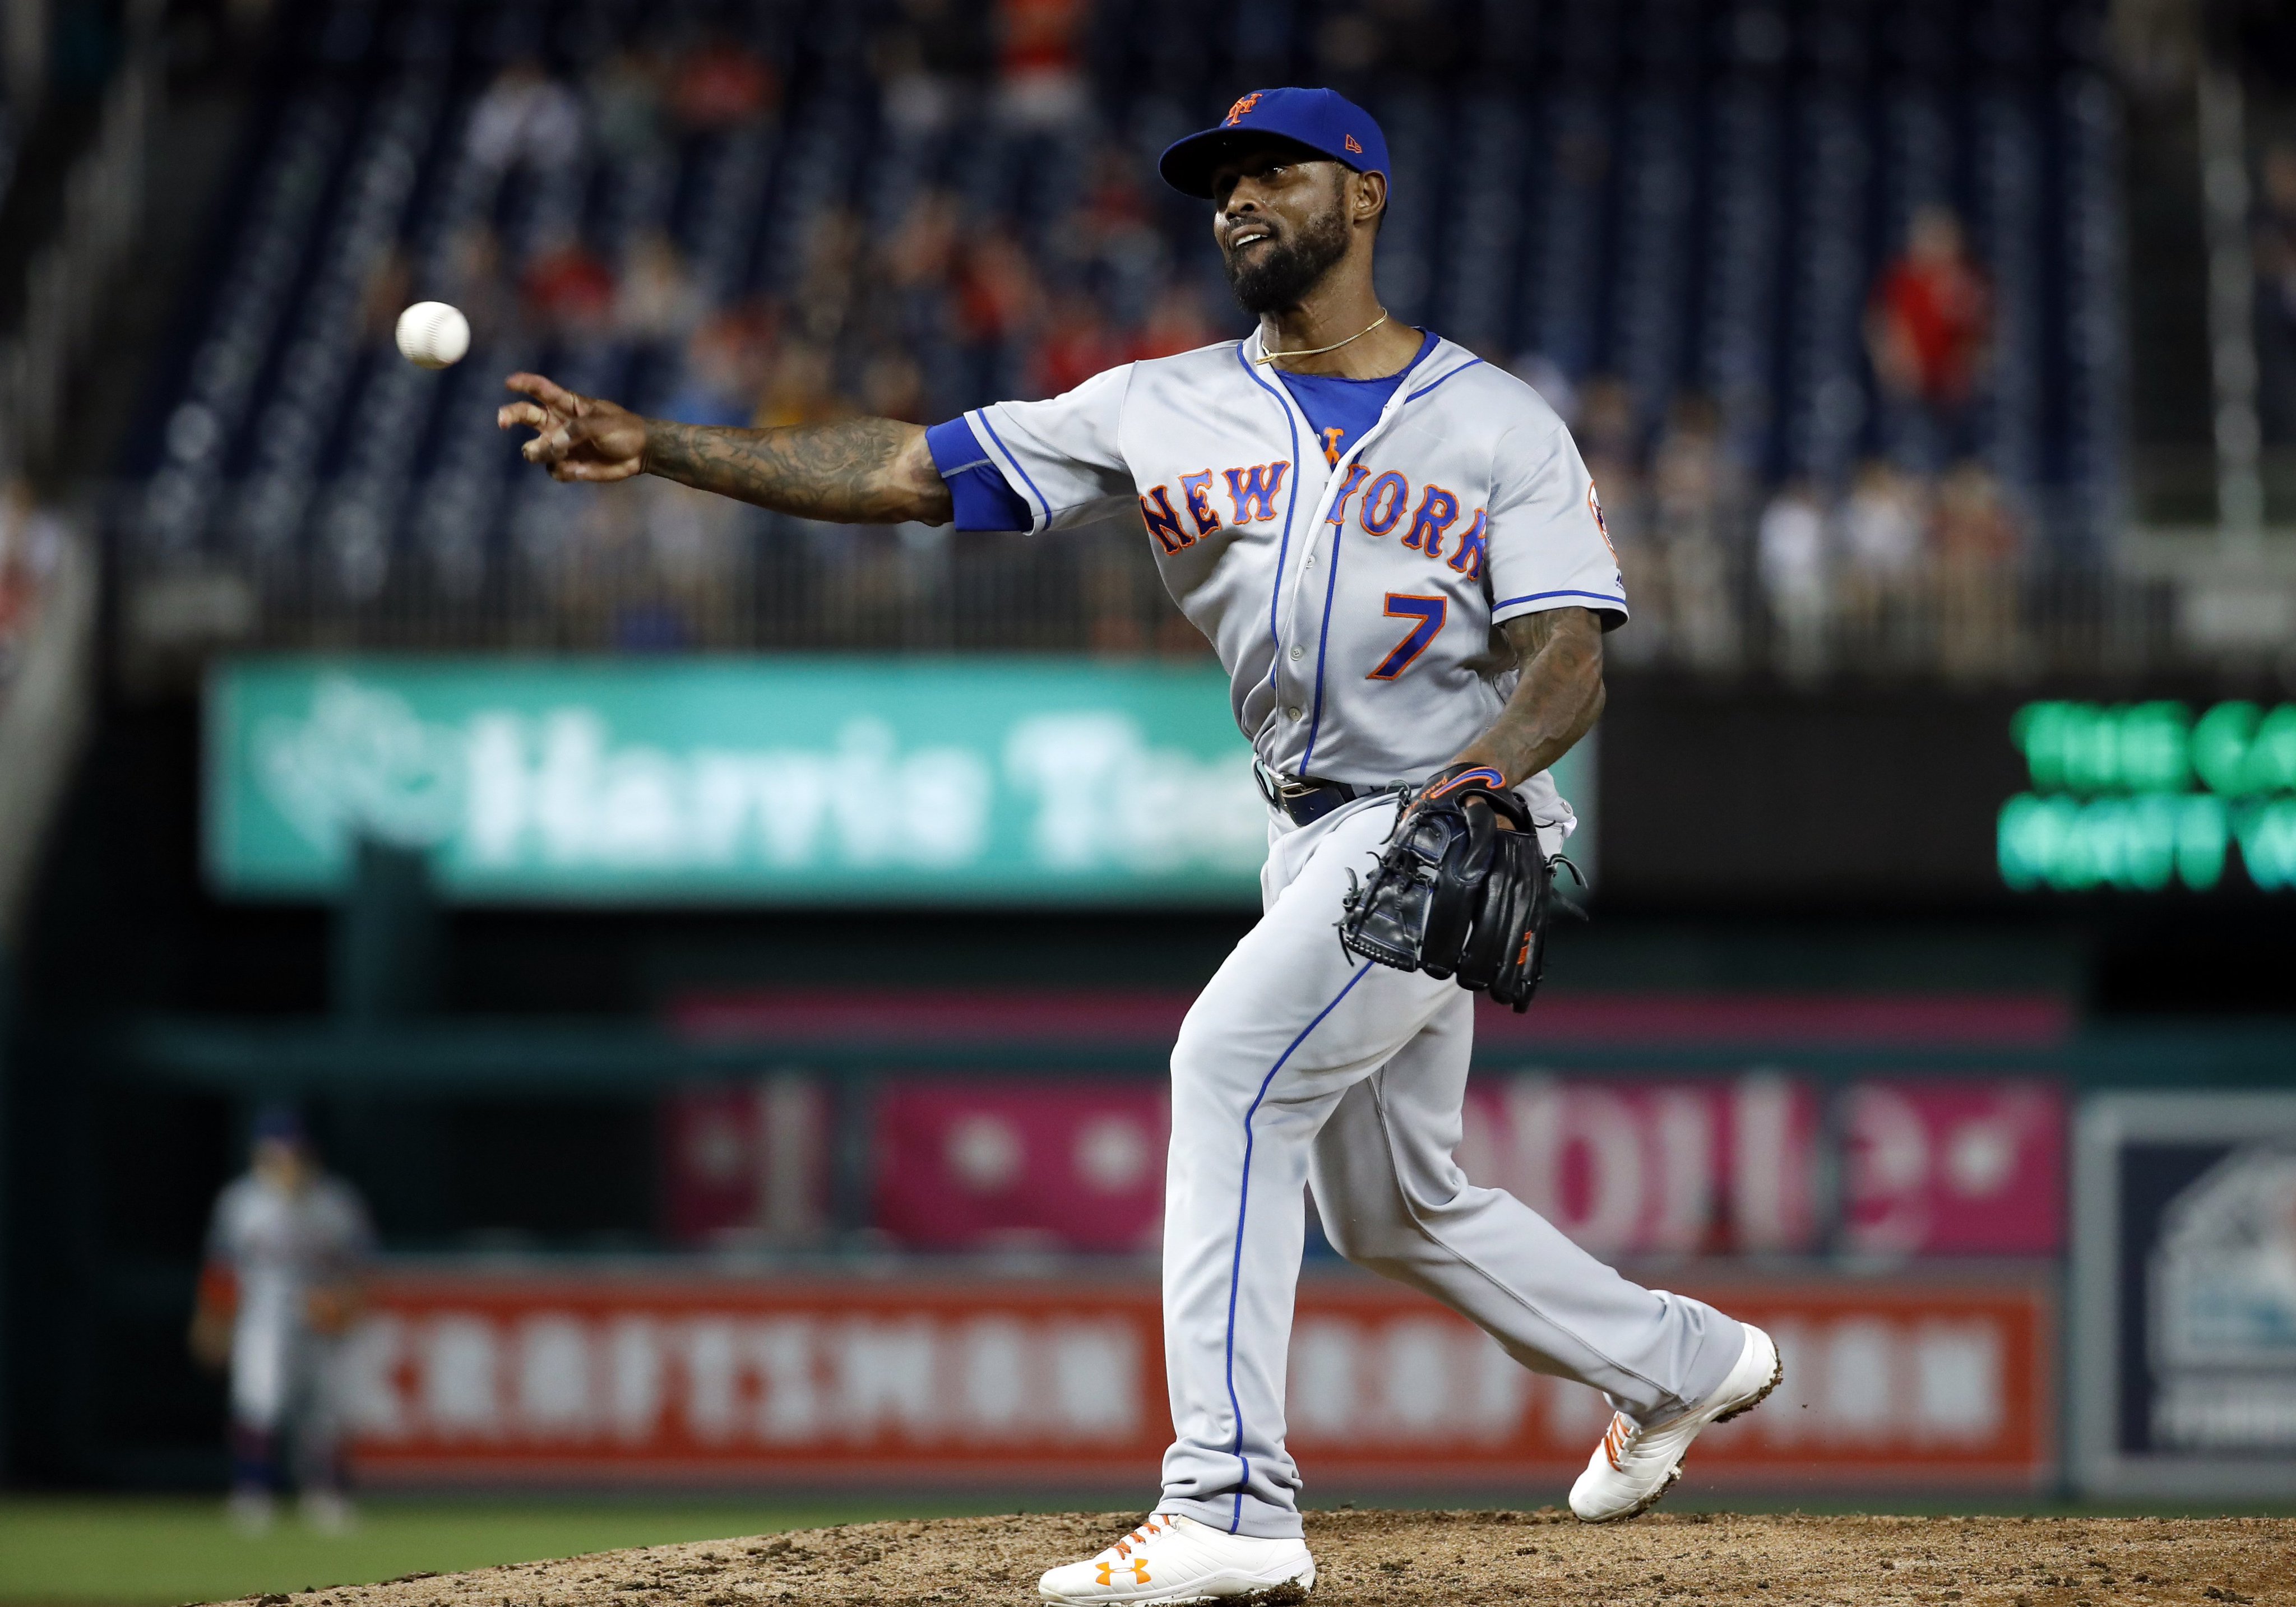 ESPN Stats & Info on X: José Reyes threw 48 pitches Tuesday, the most by a  position player since Jeff Francoeur in 2015. His 6 runs allowed were the  most a position